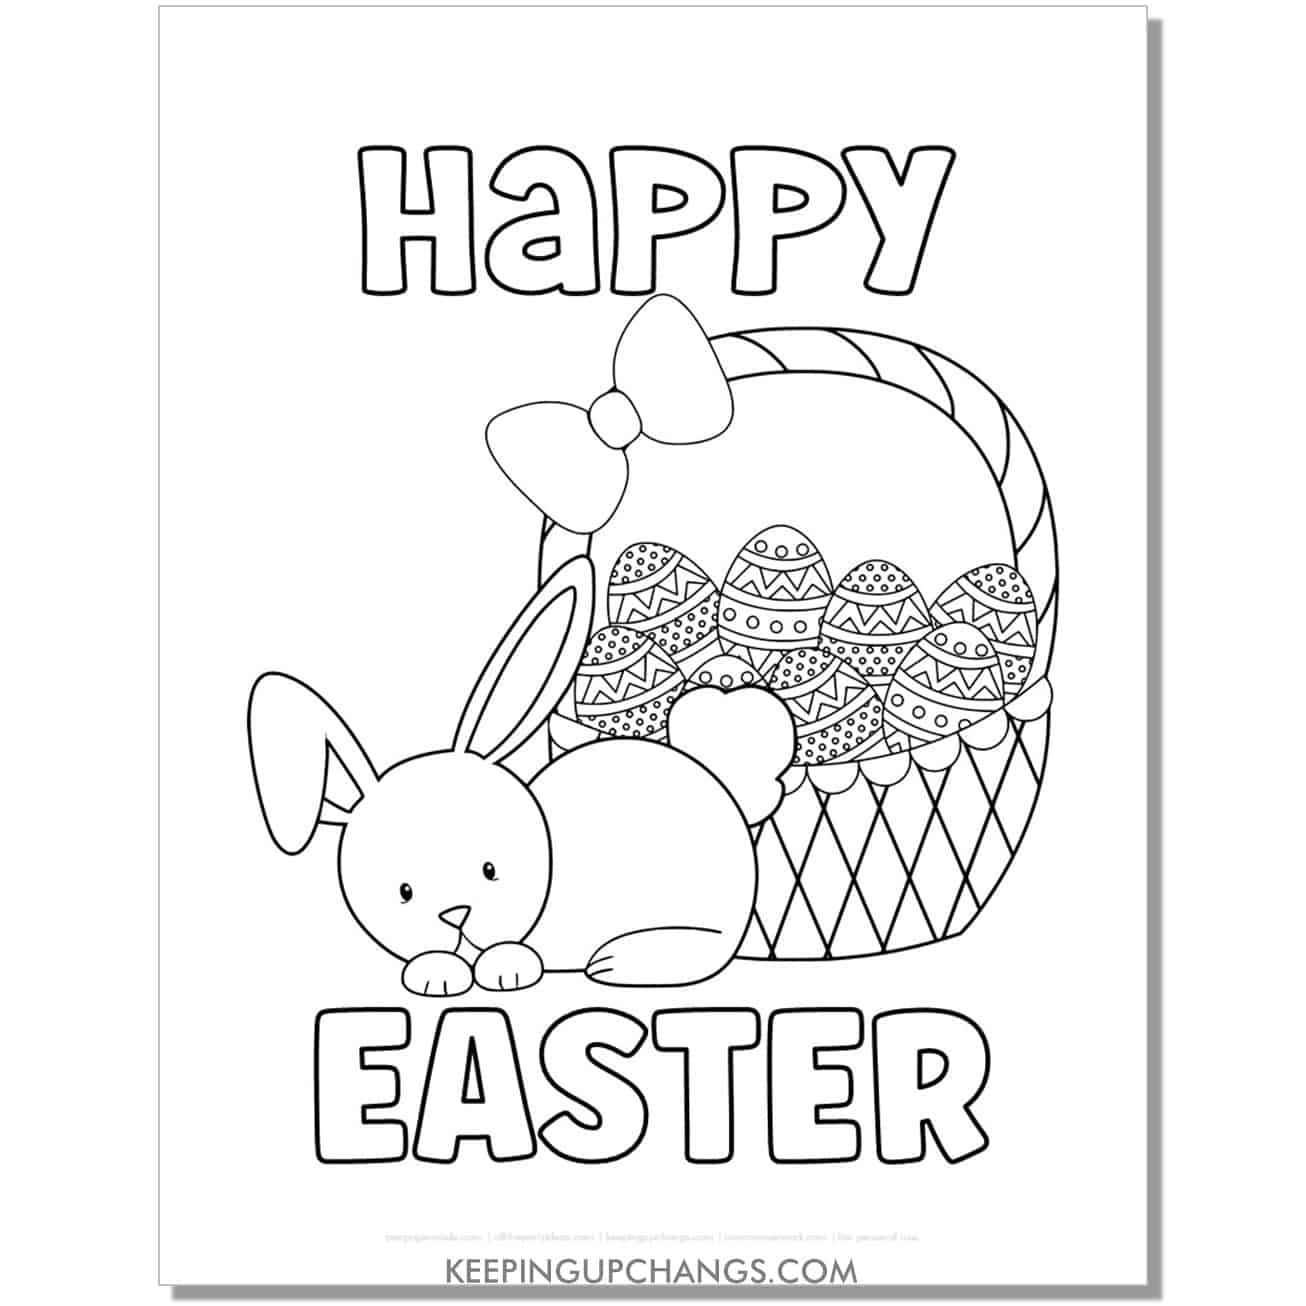 Bunny sitting on all paws in front of Easter basket with lots of eggs coloring page, sheet.